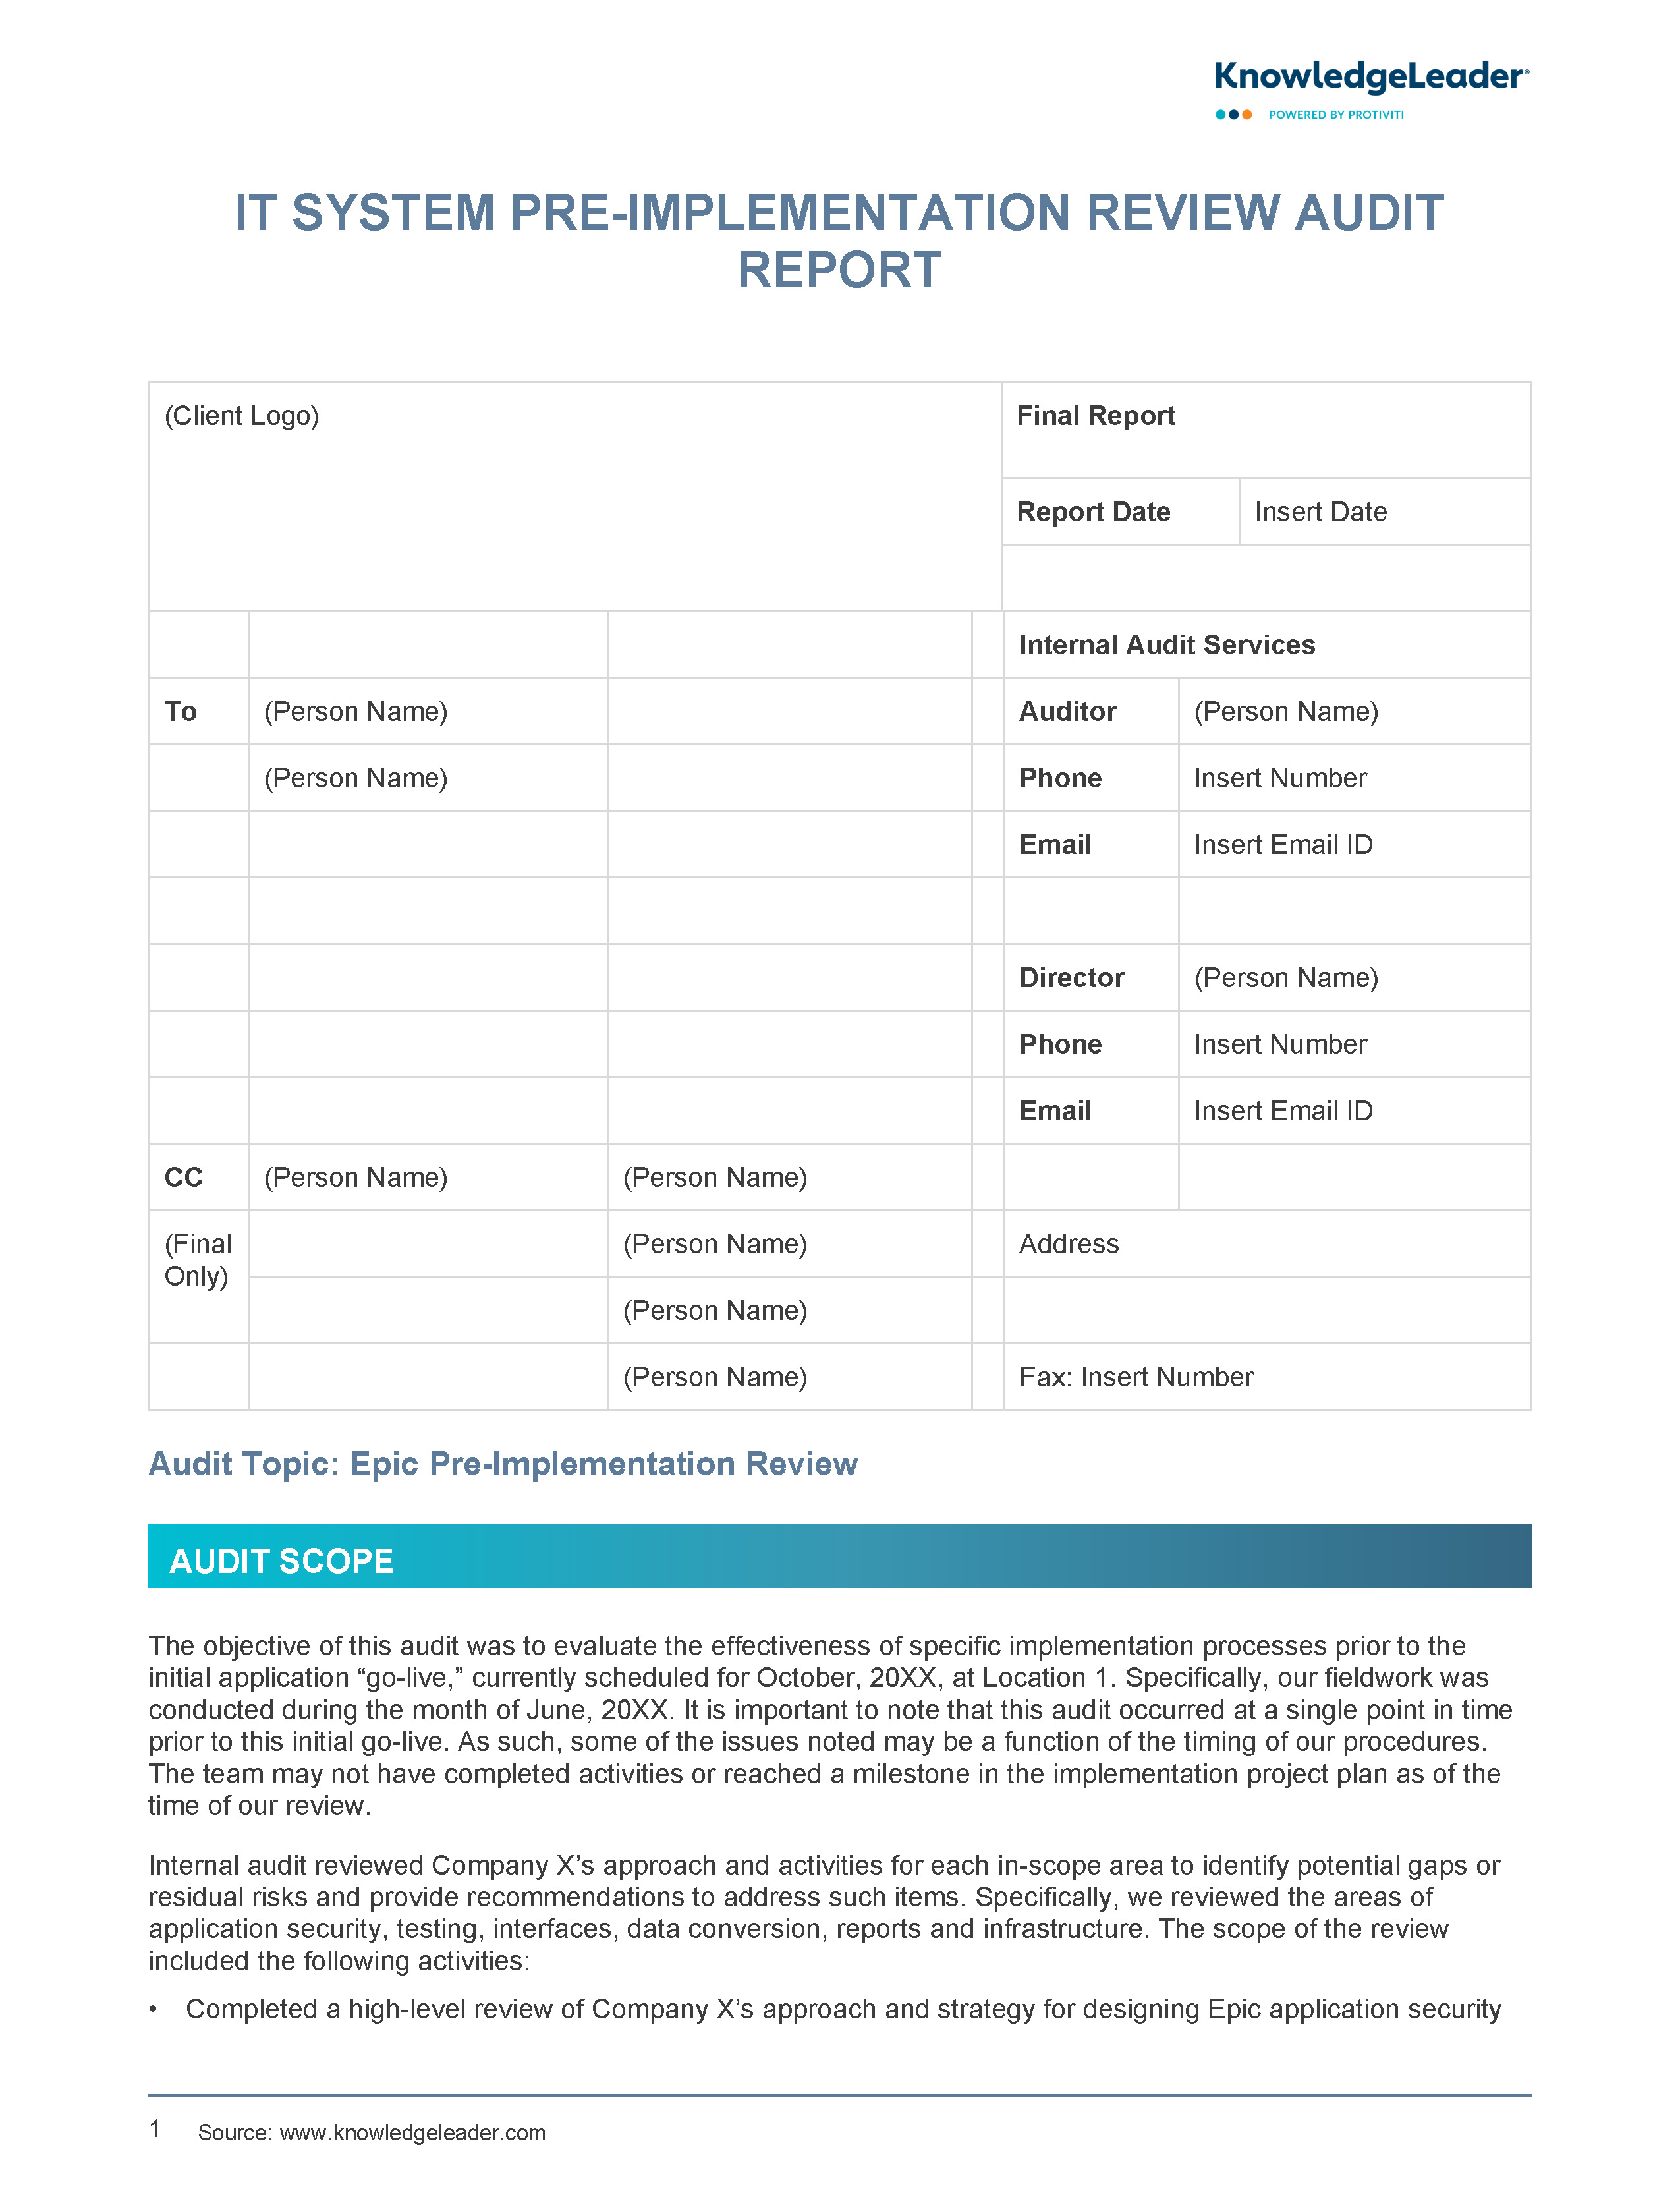 Screenshot of the first page of IT System Pre-Implementation Review Audit Report